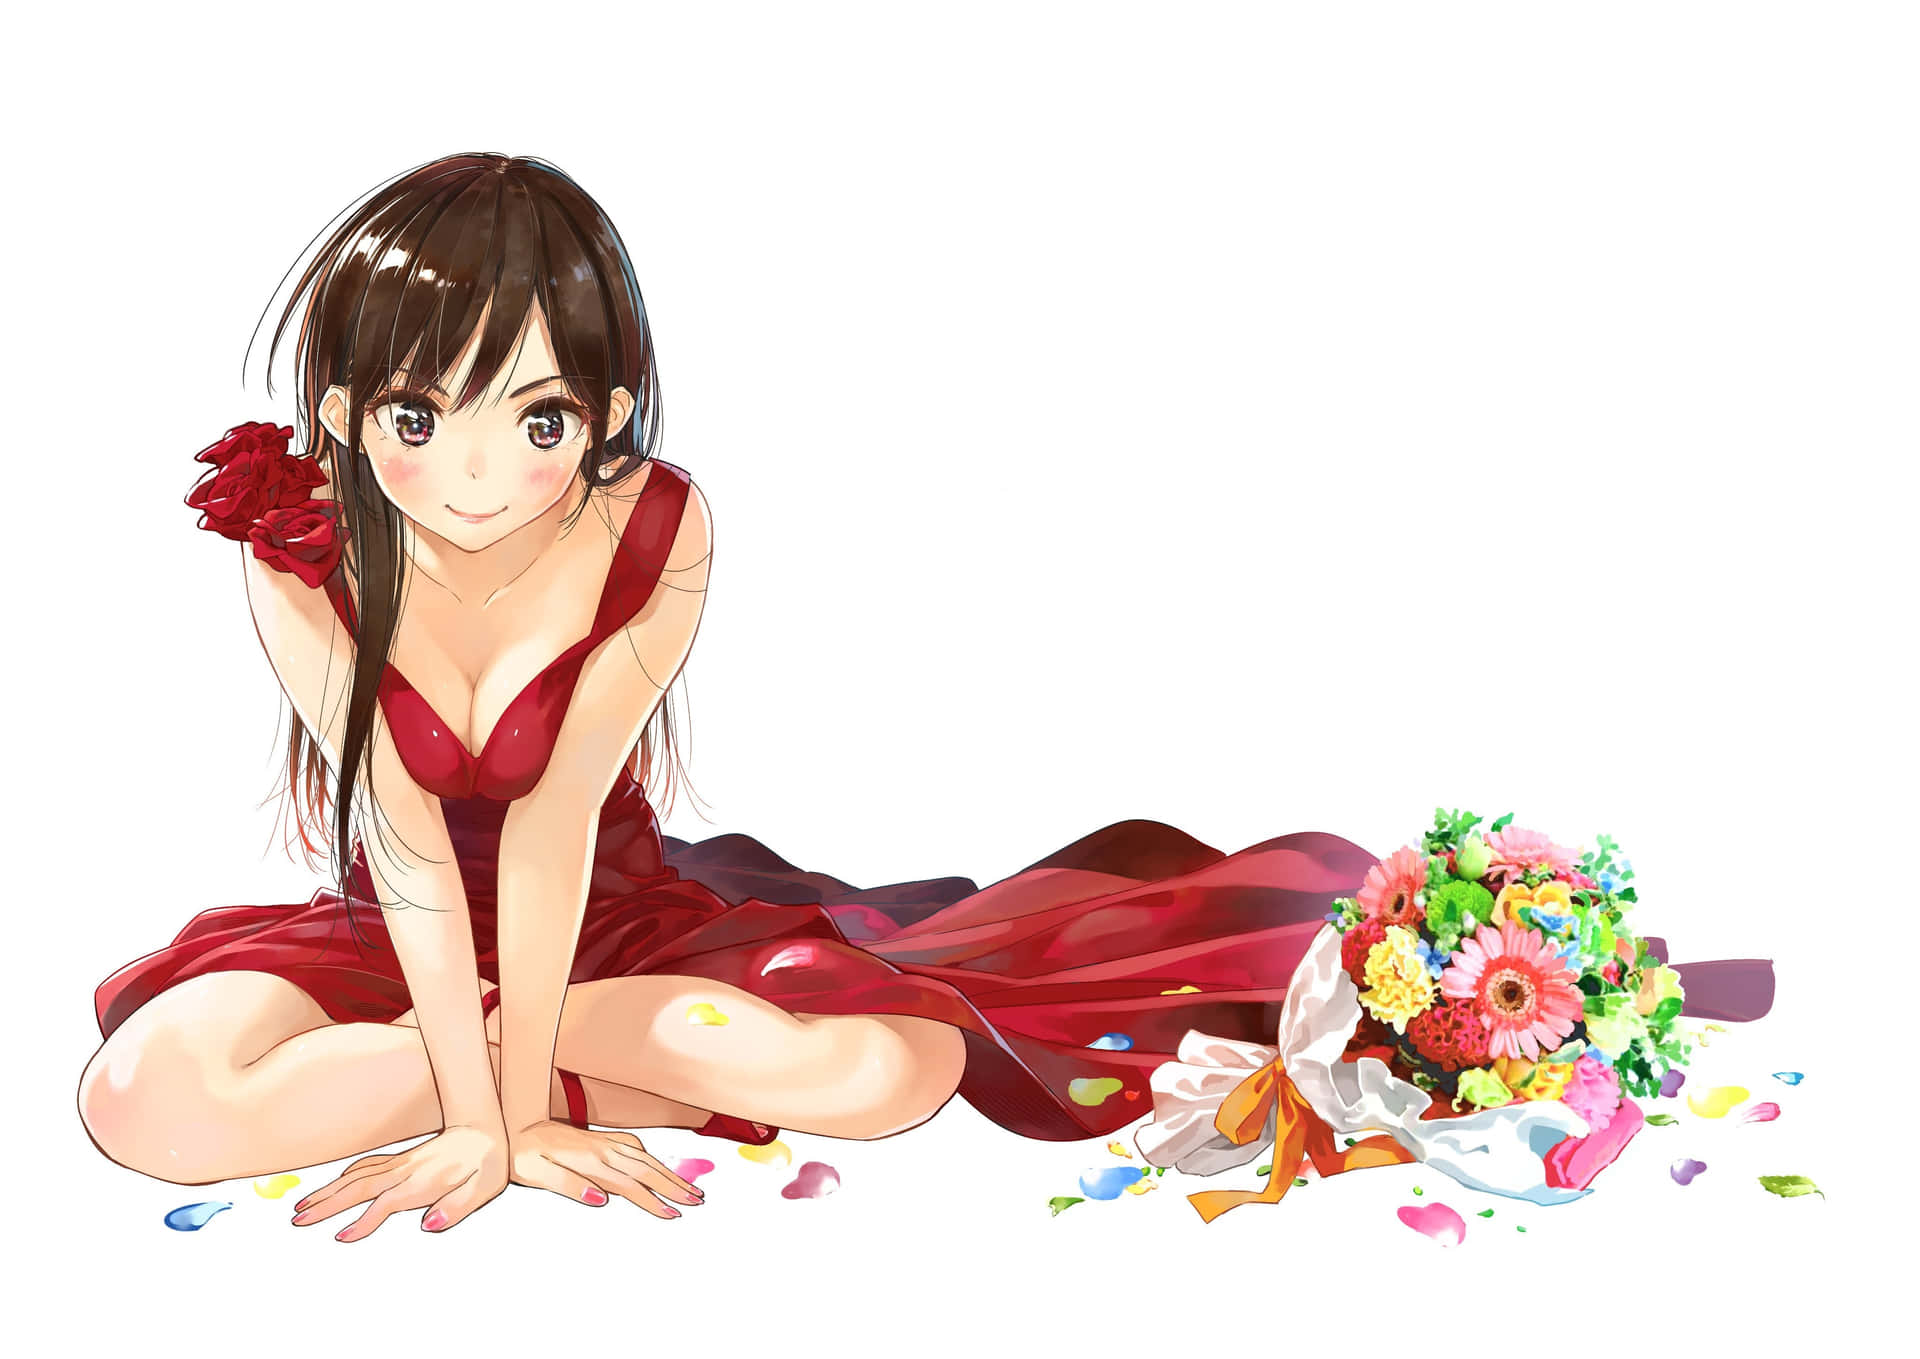 A Girl In A Red Dress Sitting On The Ground With Flowers Wallpaper